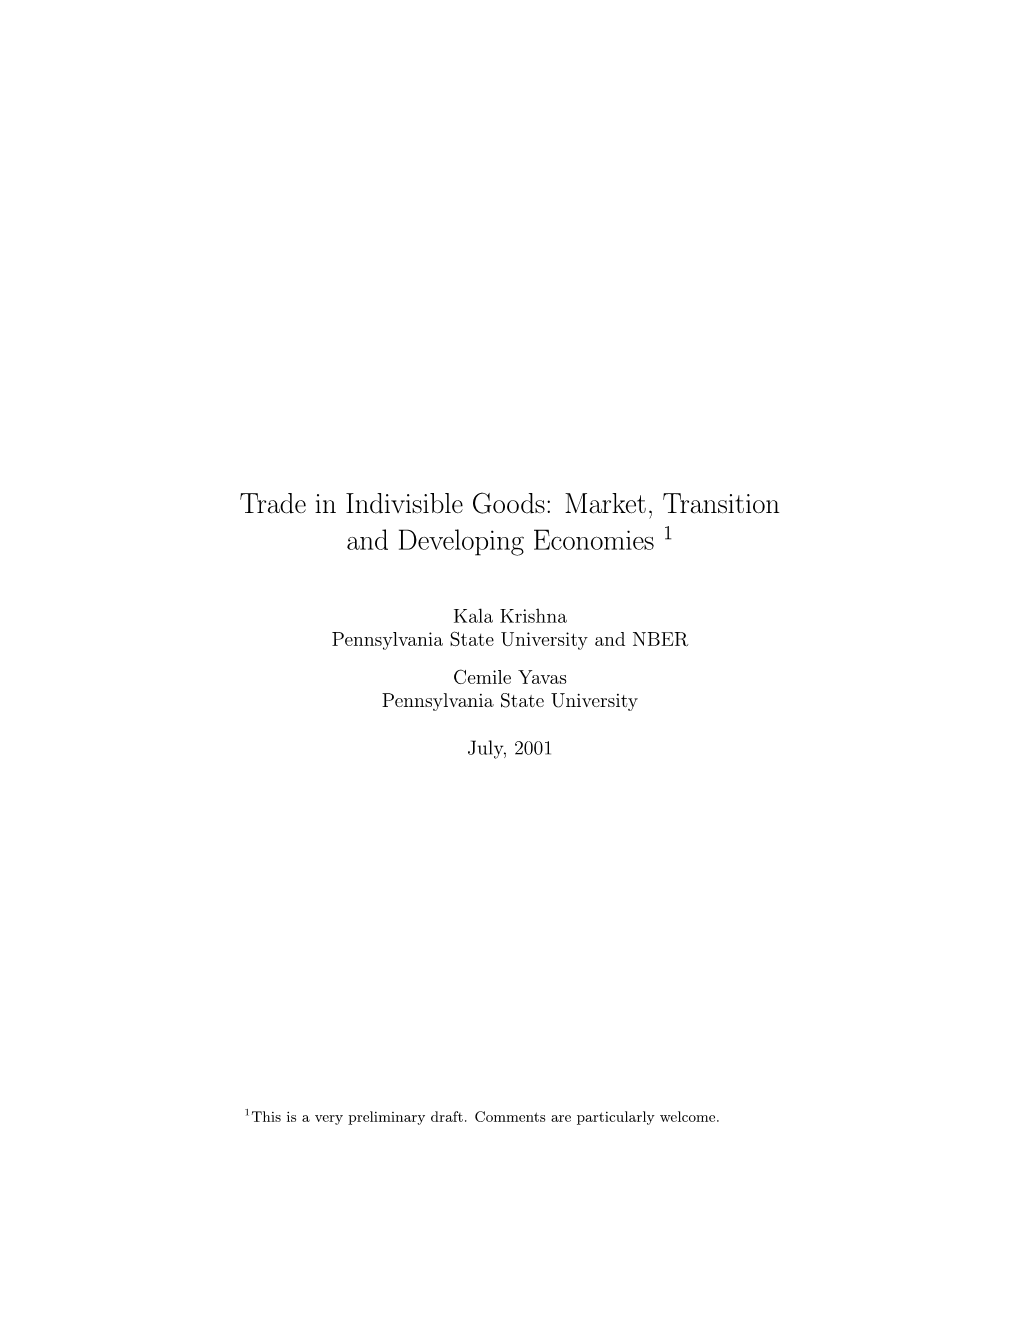 Trade in Indivisible Goods: Market, Transition and Developing Economies 1